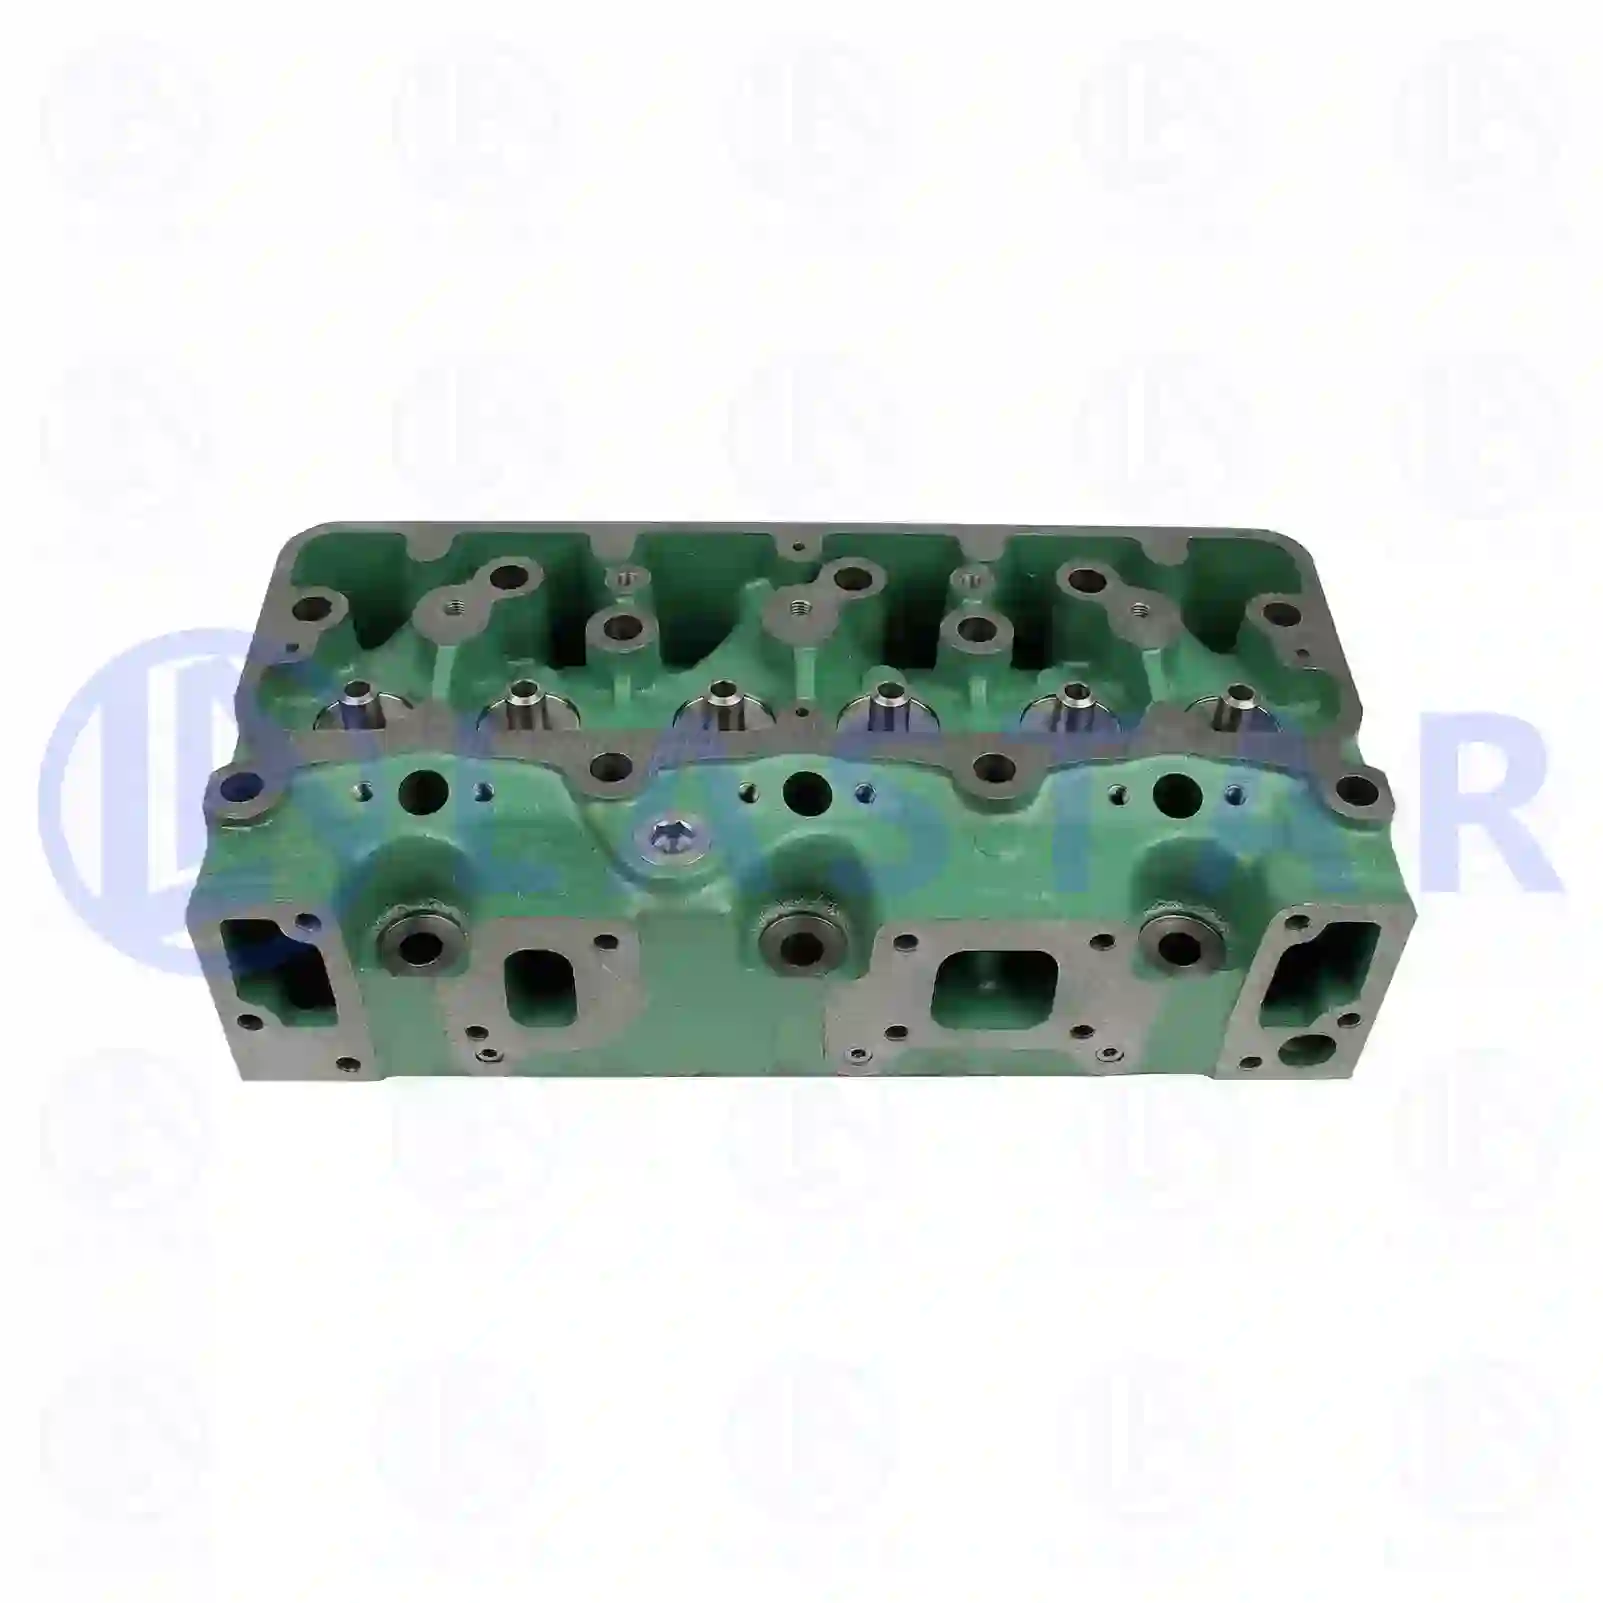 Cylinder head, without valves, 77700680, 10570028, 10570037, 10570048, 10570088, 10570091, 1523418, 1570028, 1570037, 1570048, 1570049, 1570088, 1570091, 289162, 347428, 390667, 523418, 570027, 570028, 570036, 570037, 570048, 570049, 570088, 570091 ||  77700680 Lastar Spare Part | Truck Spare Parts, Auotomotive Spare Parts Cylinder head, without valves, 77700680, 10570028, 10570037, 10570048, 10570088, 10570091, 1523418, 1570028, 1570037, 1570048, 1570049, 1570088, 1570091, 289162, 347428, 390667, 523418, 570027, 570028, 570036, 570037, 570048, 570049, 570088, 570091 ||  77700680 Lastar Spare Part | Truck Spare Parts, Auotomotive Spare Parts